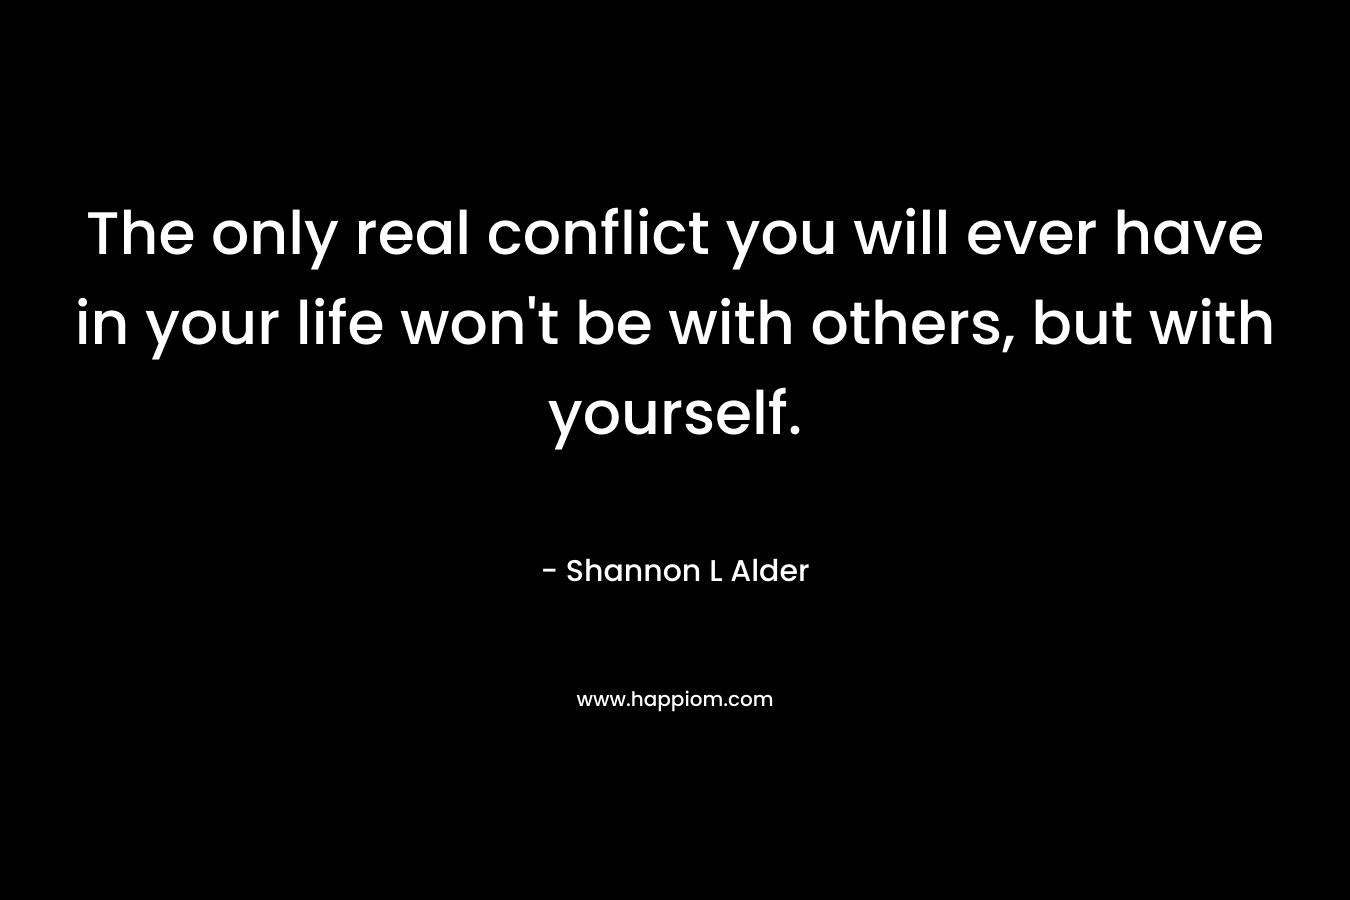 The only real conflict you will ever have in your life won't be with others, but with yourself.